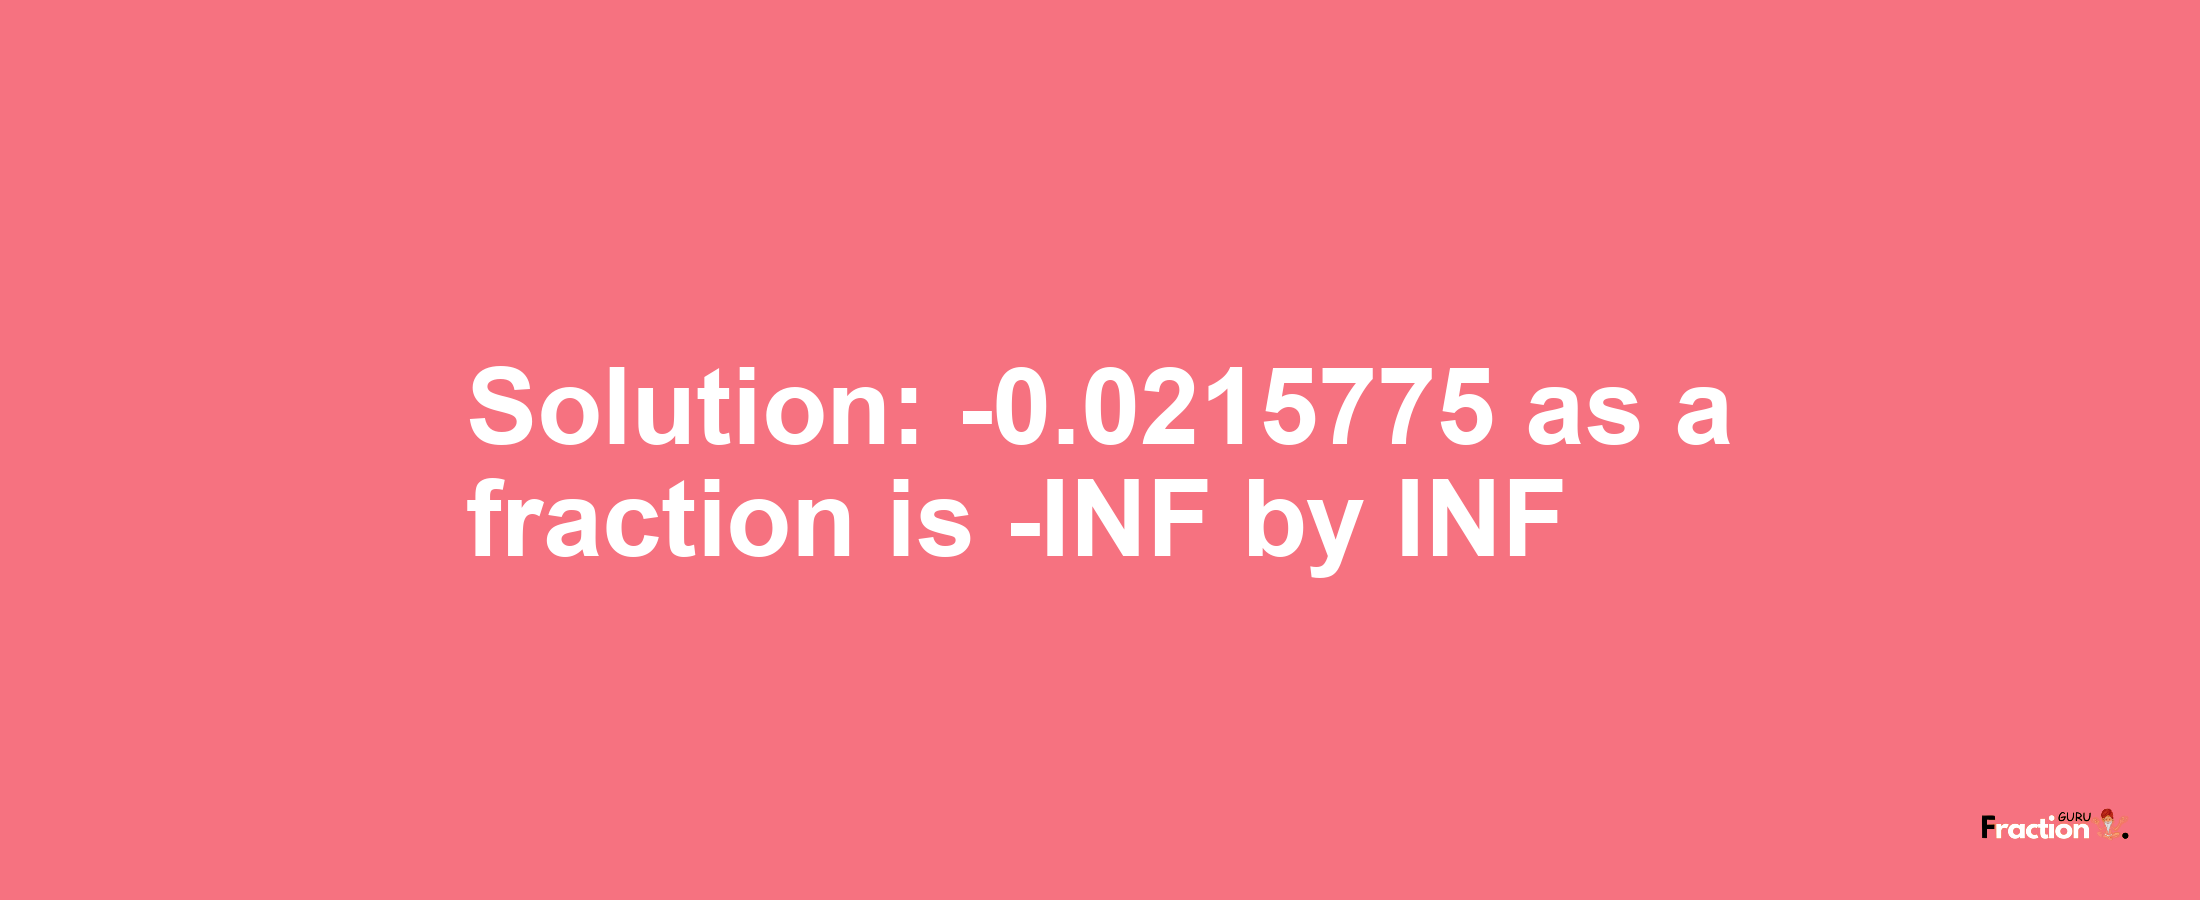 Solution:-0.0215775 as a fraction is -INF/INF